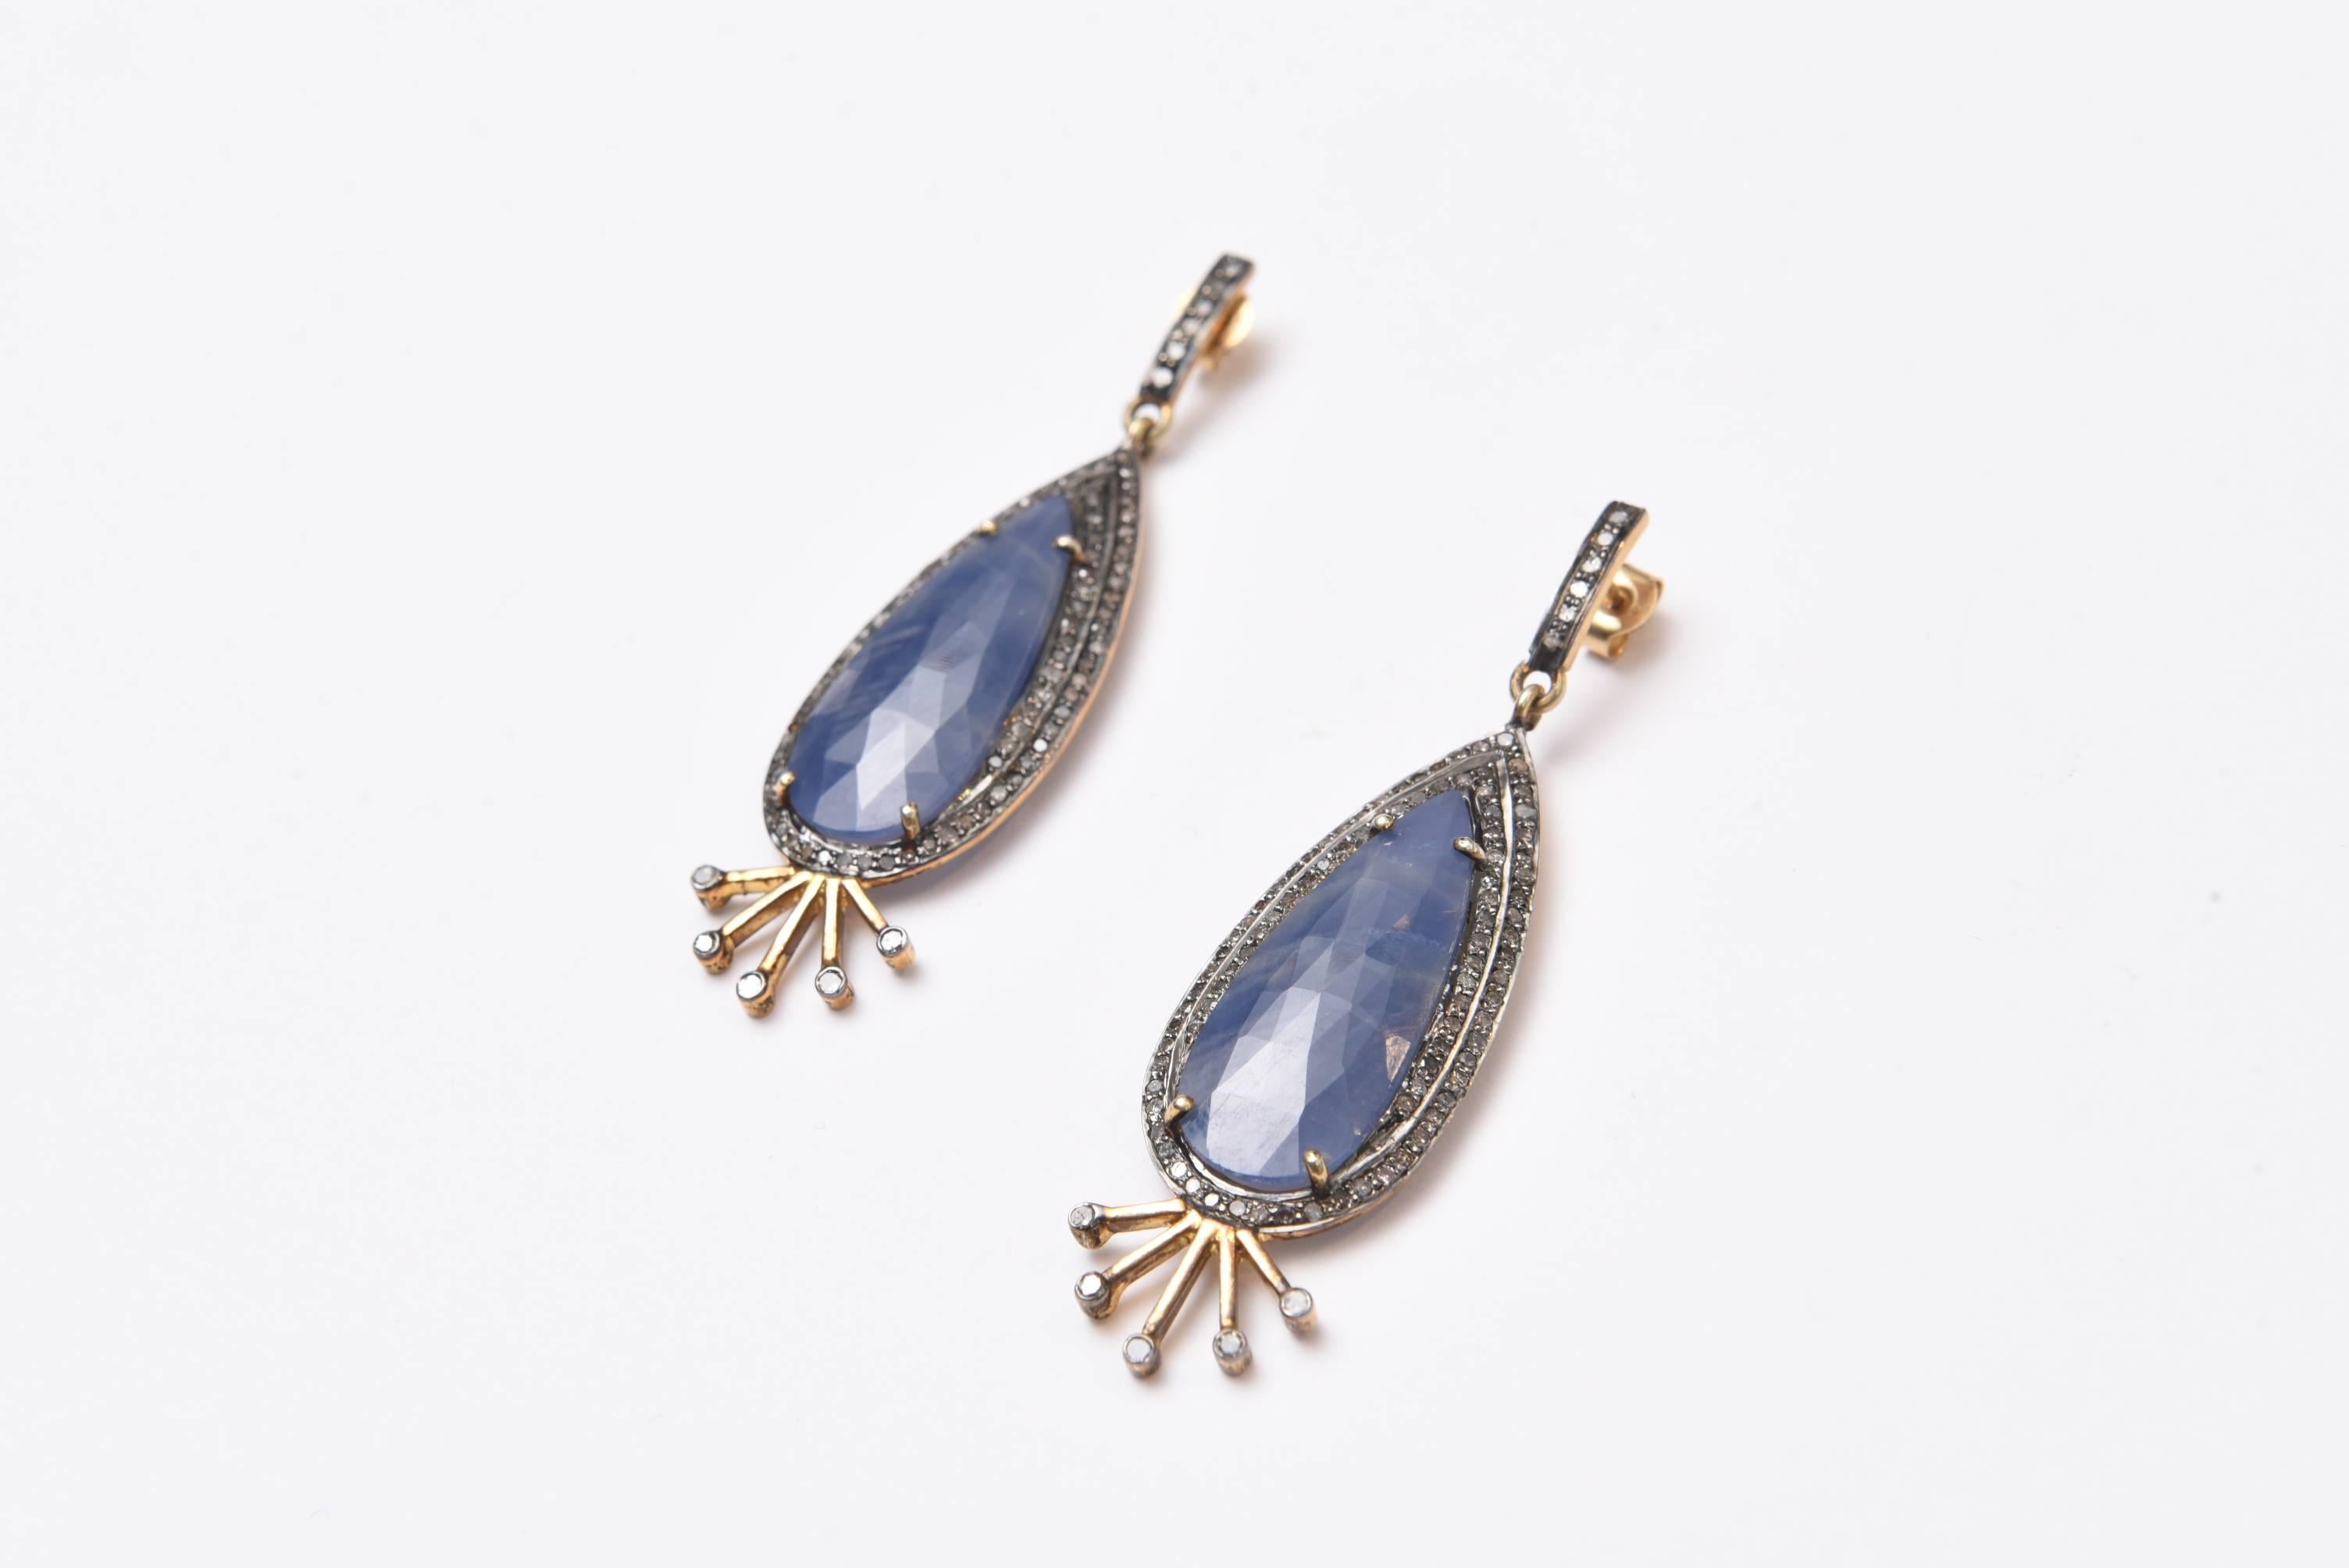 Unusual and elegant pear-shaped, rosecut blue sapphire earrings and diamonds set in sterling silver with 18K gold post.  A double row of pave` set diamonds along the upper half and diamonds at the ends of the radiating rays at the bottom.  Carat